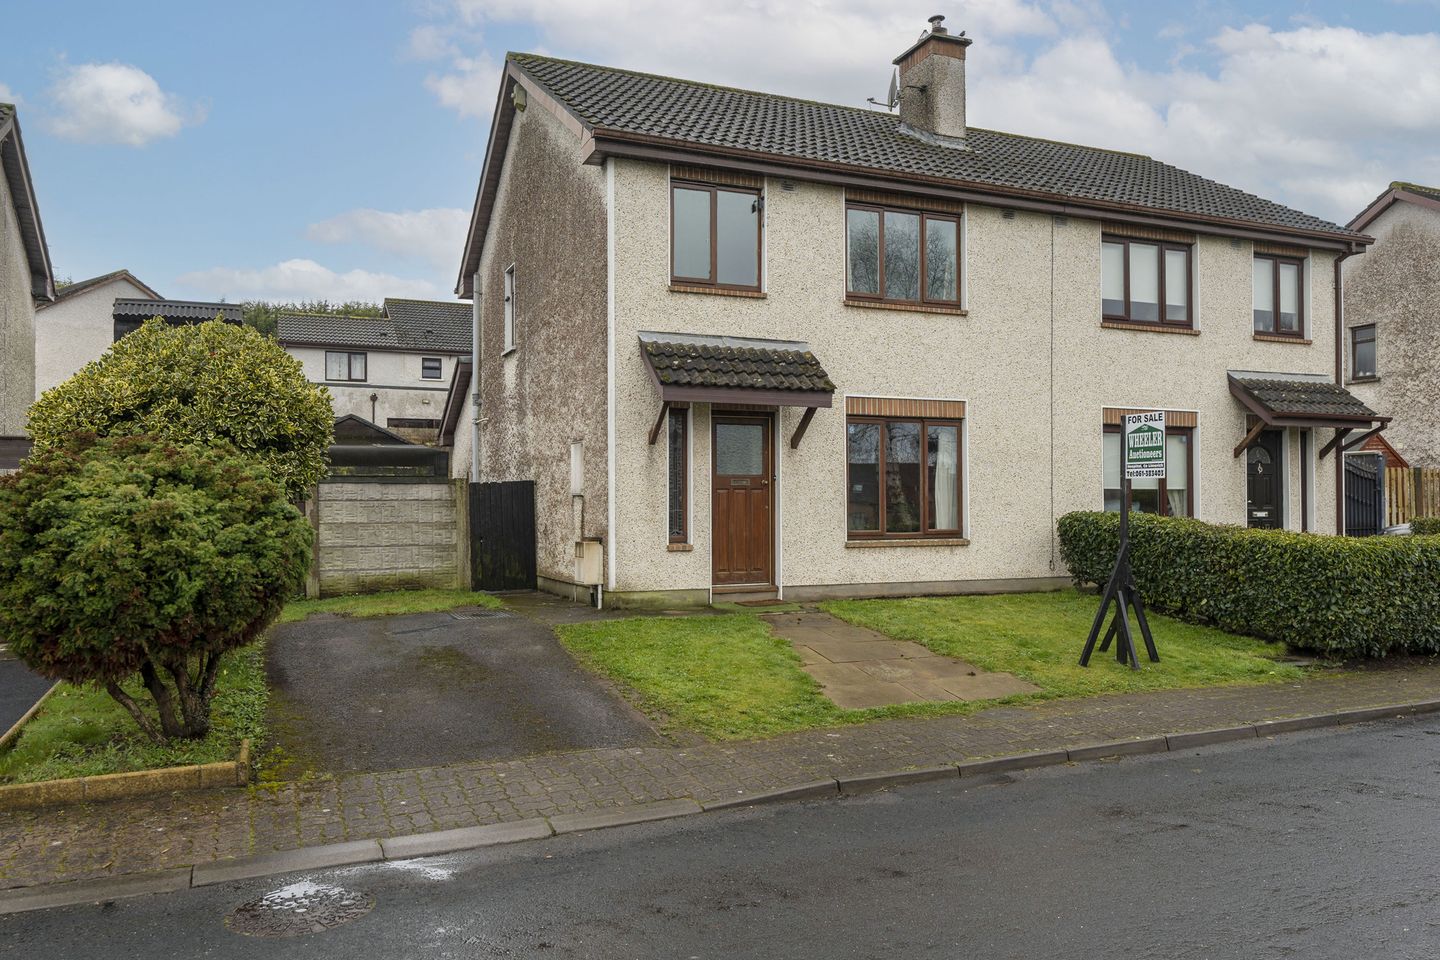 5 The Elms, Briarfield, Castletroy, Co. Limerick